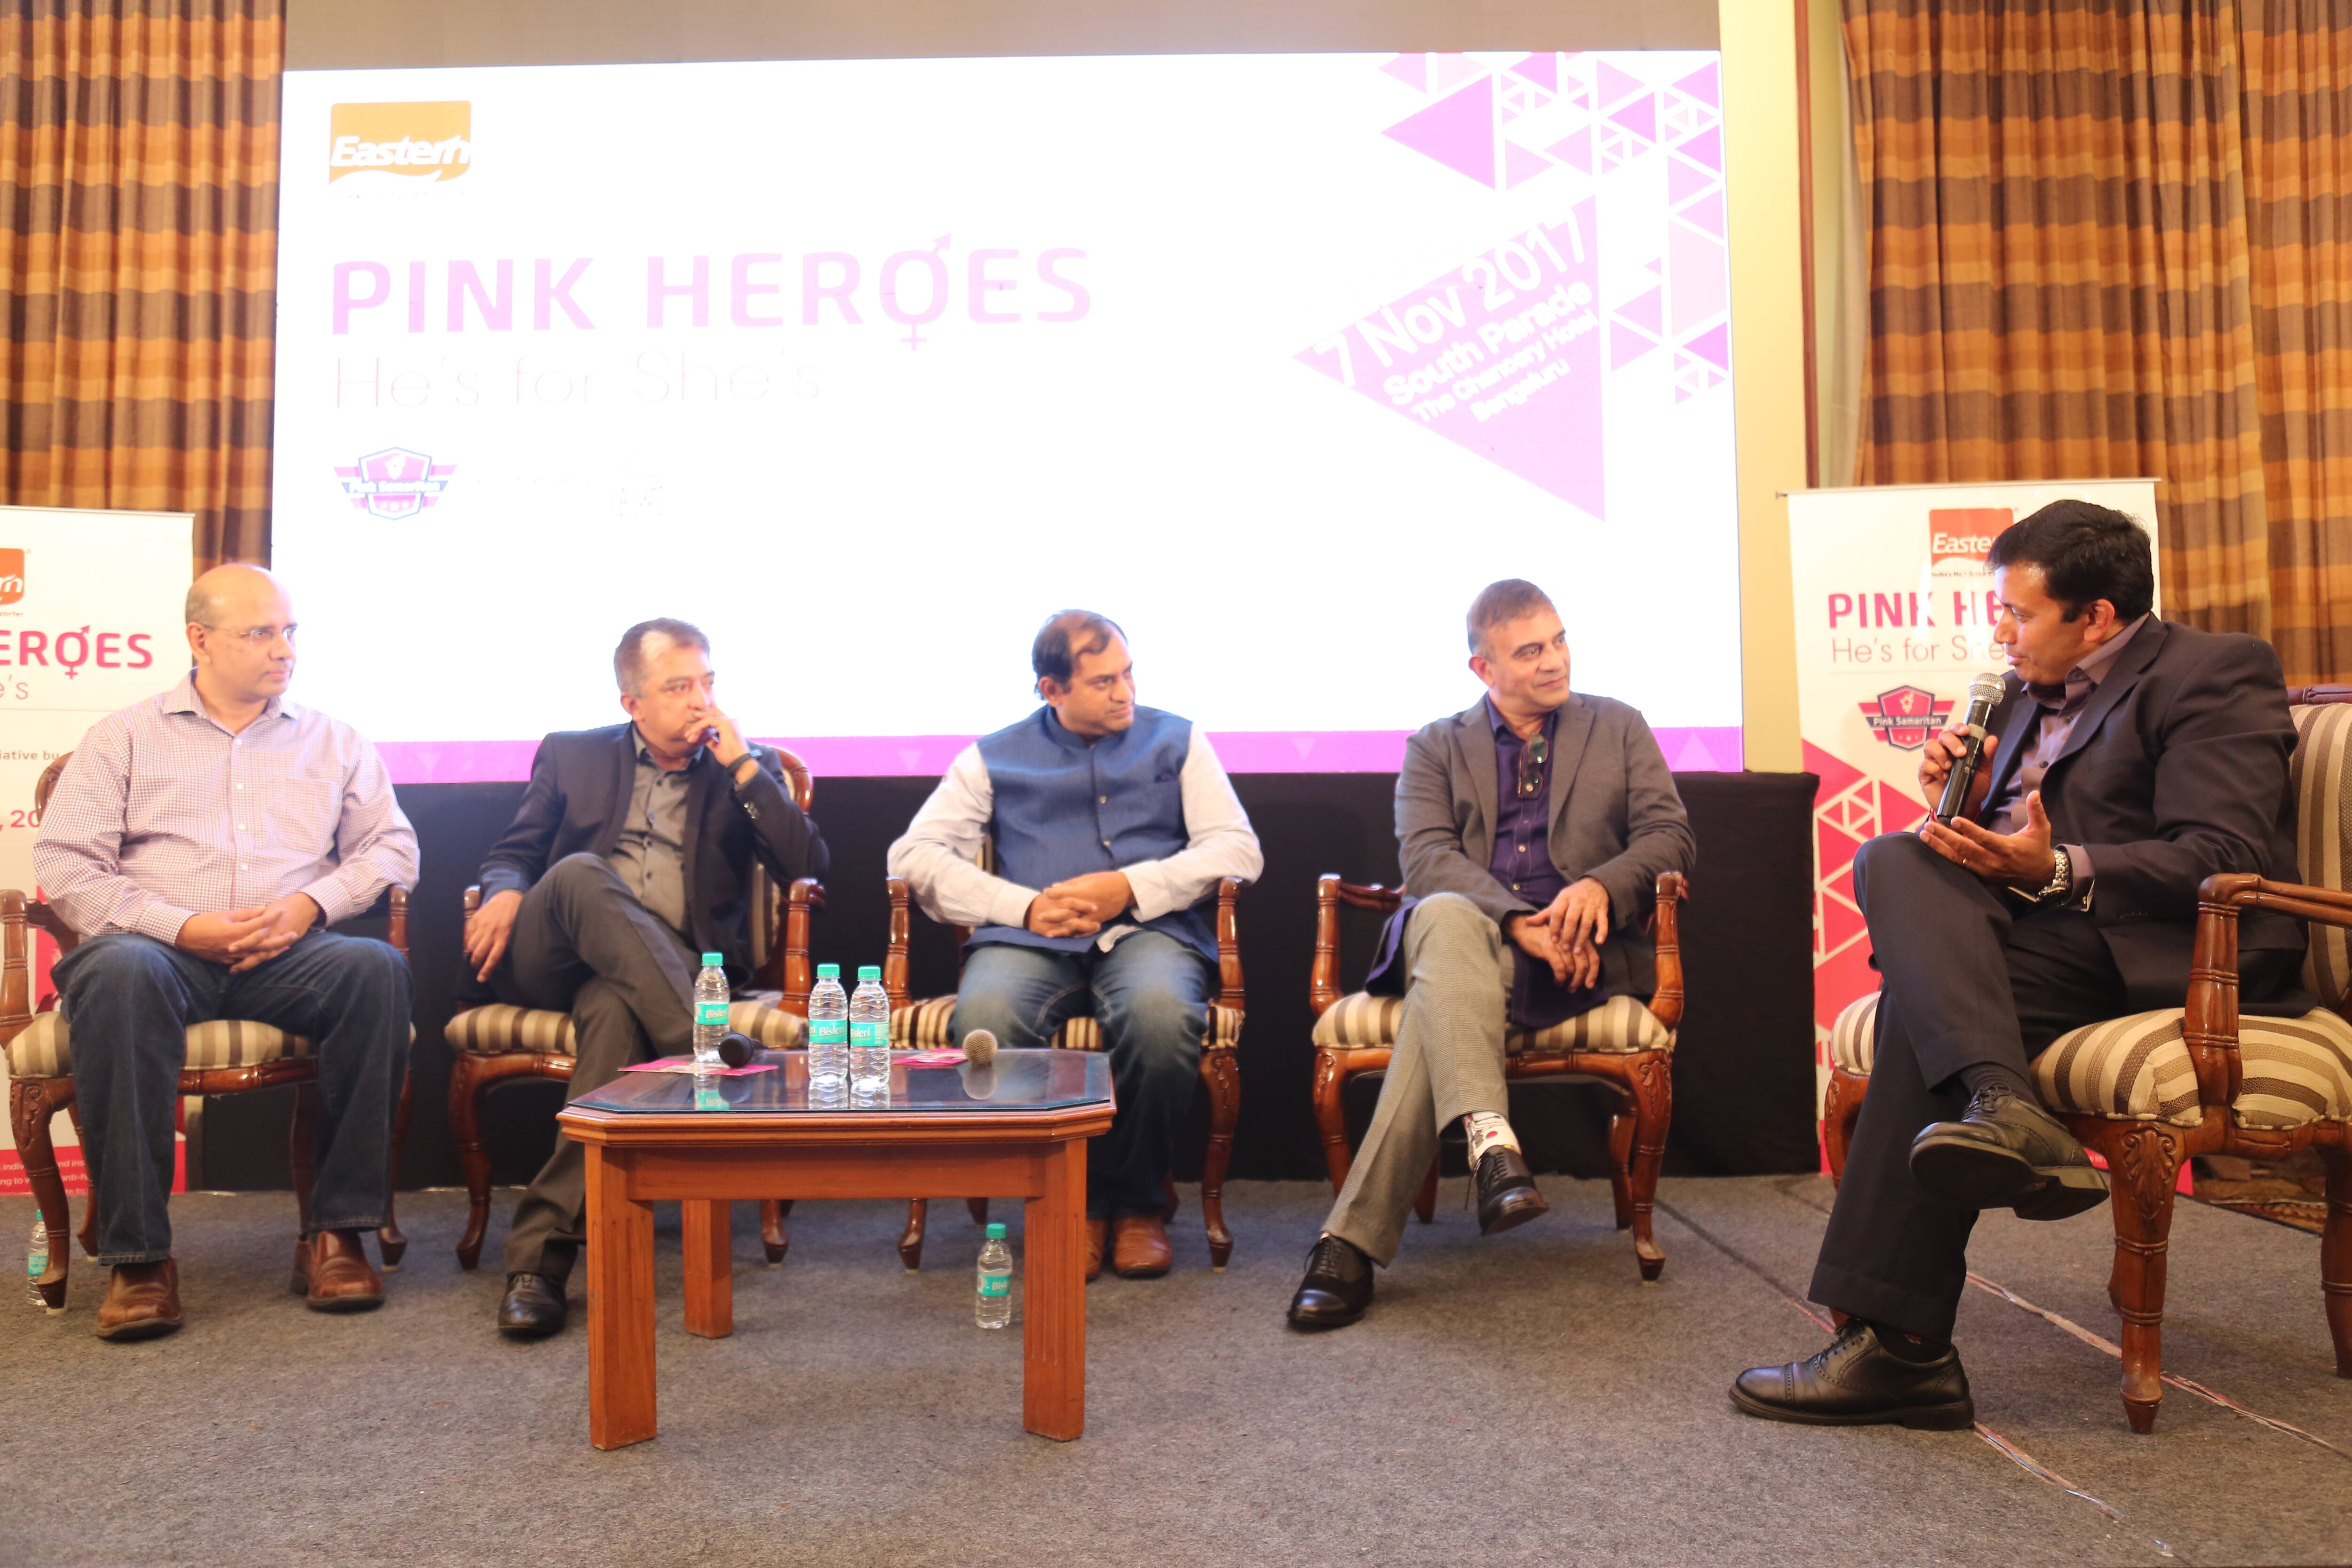 EASTERN CONDIMENTS AND ASIANET NEWS NETWORK CELEBRATE  PINK HEROES